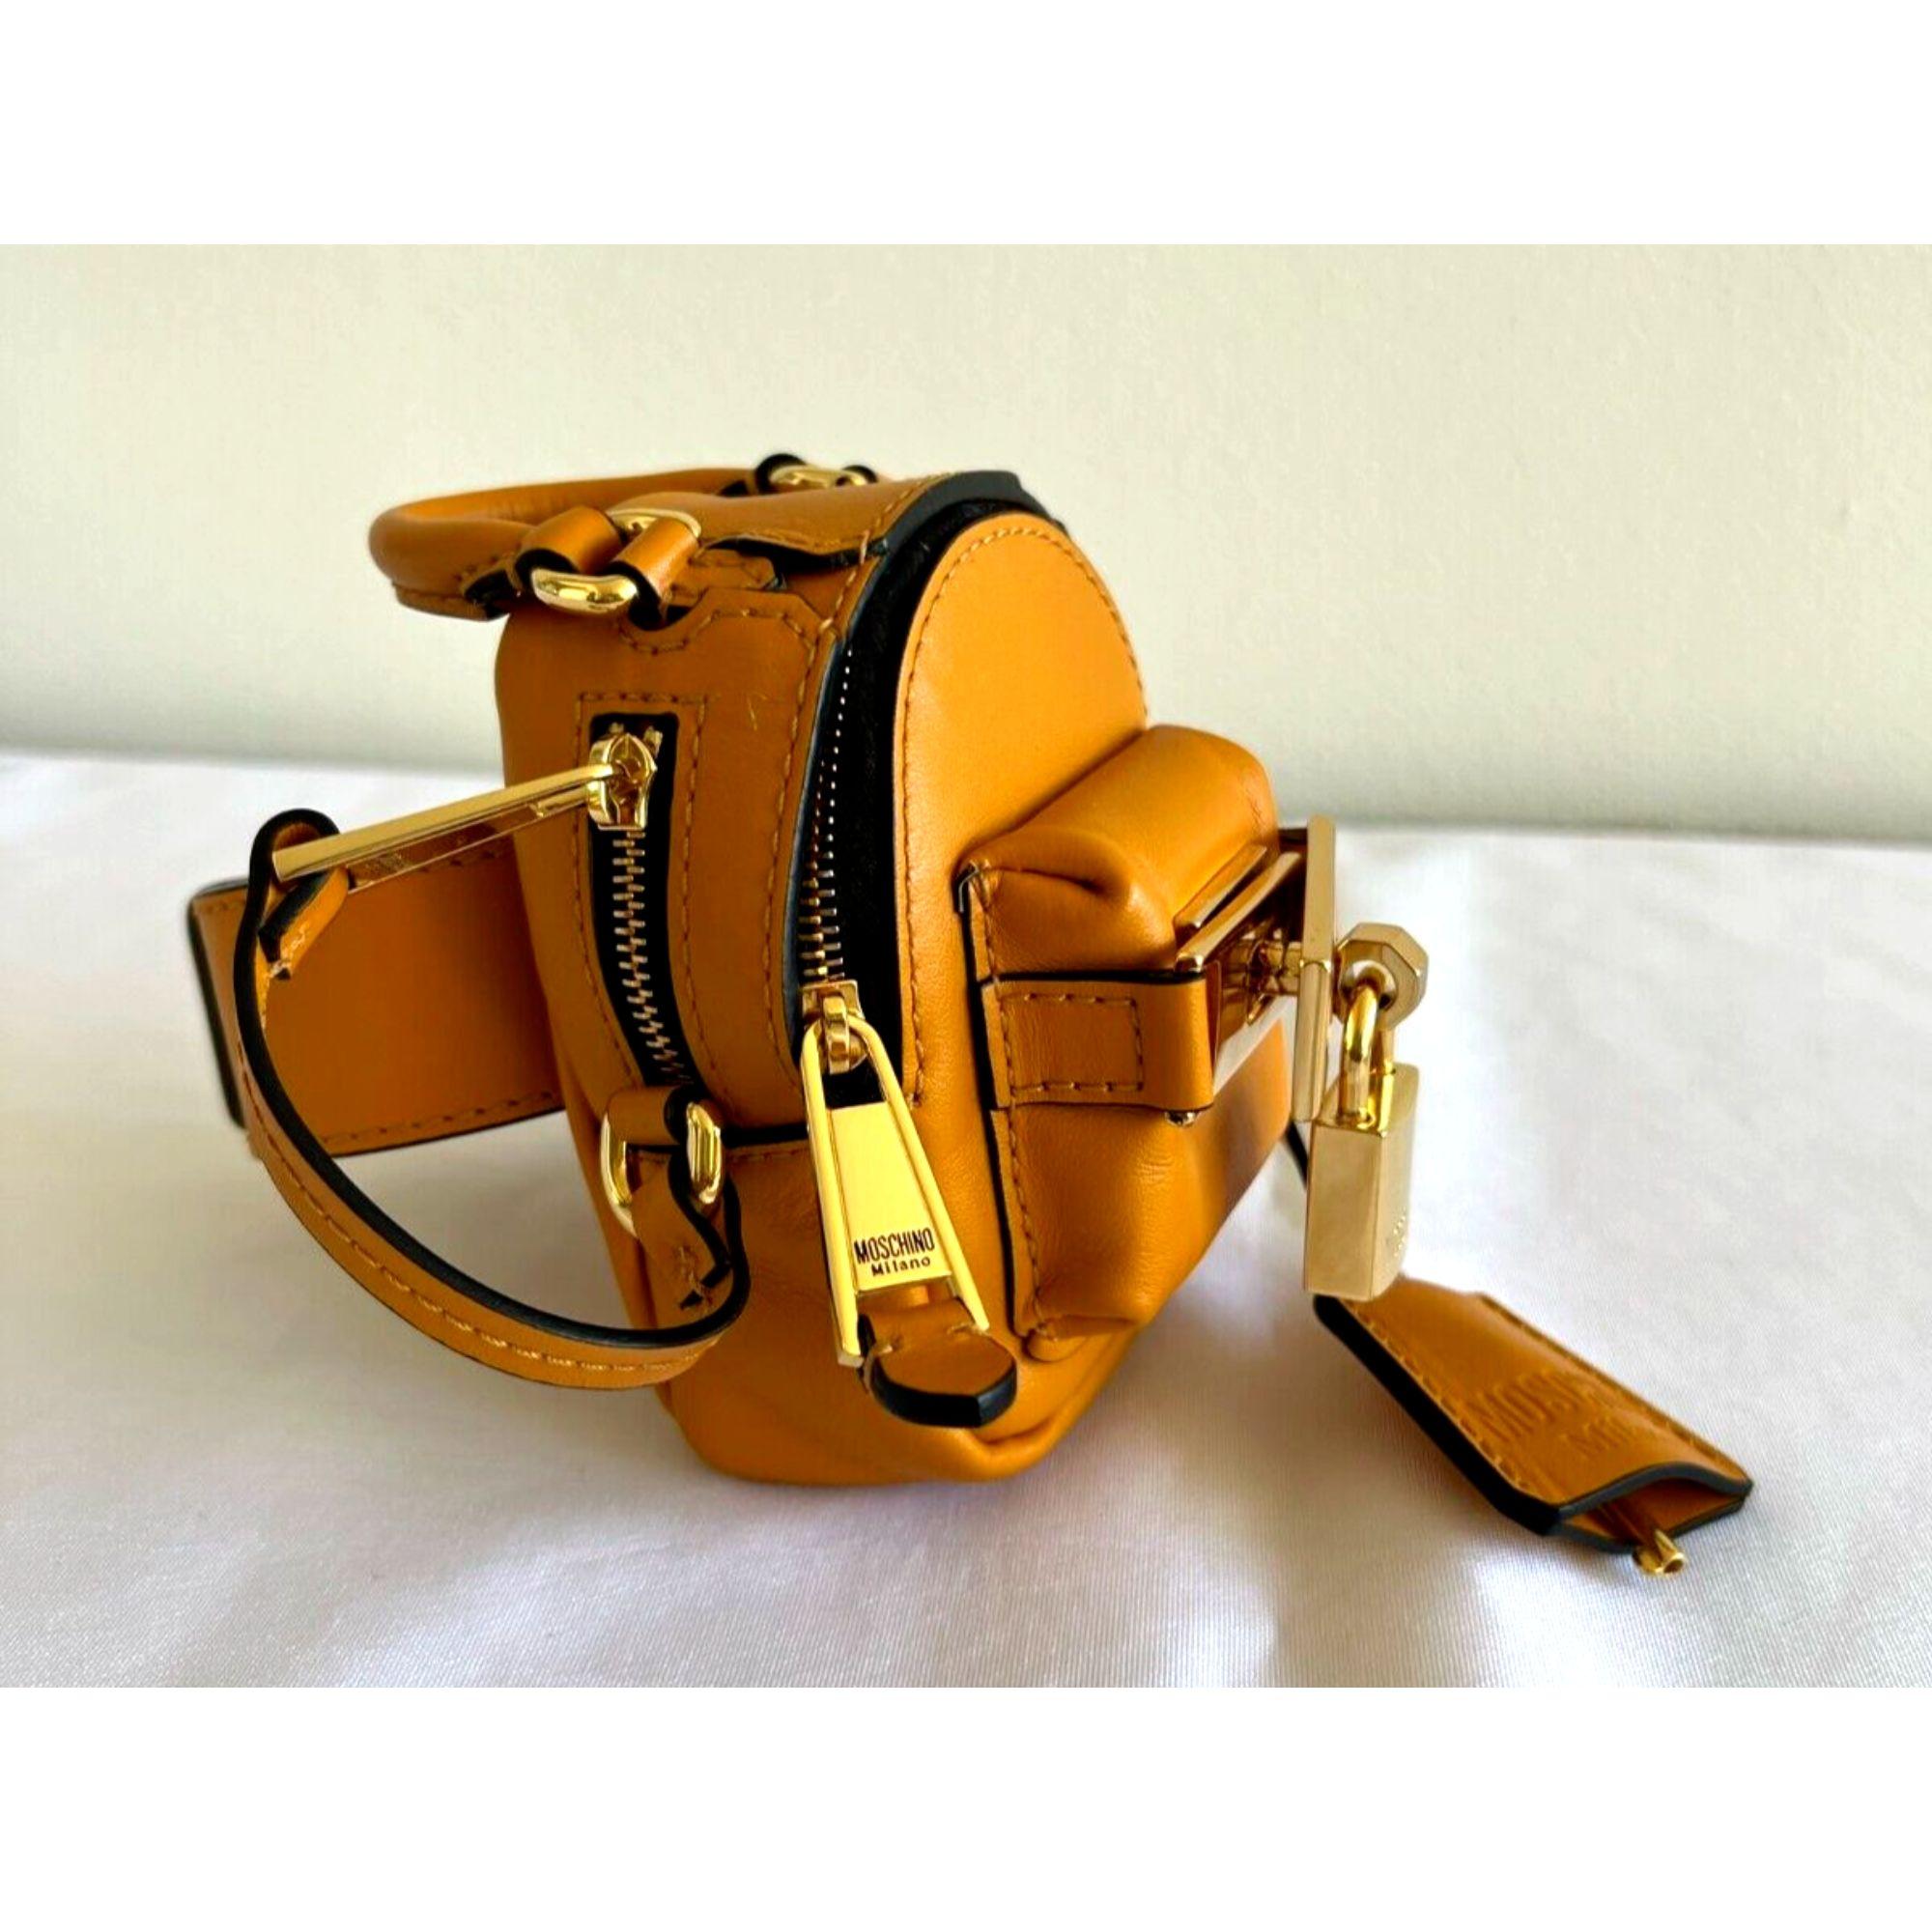 AW20 Moschino Couture Mustard Backpack Shaped Shoulder Bag by Jeremy Scott In New Condition For Sale In Palm Springs, CA